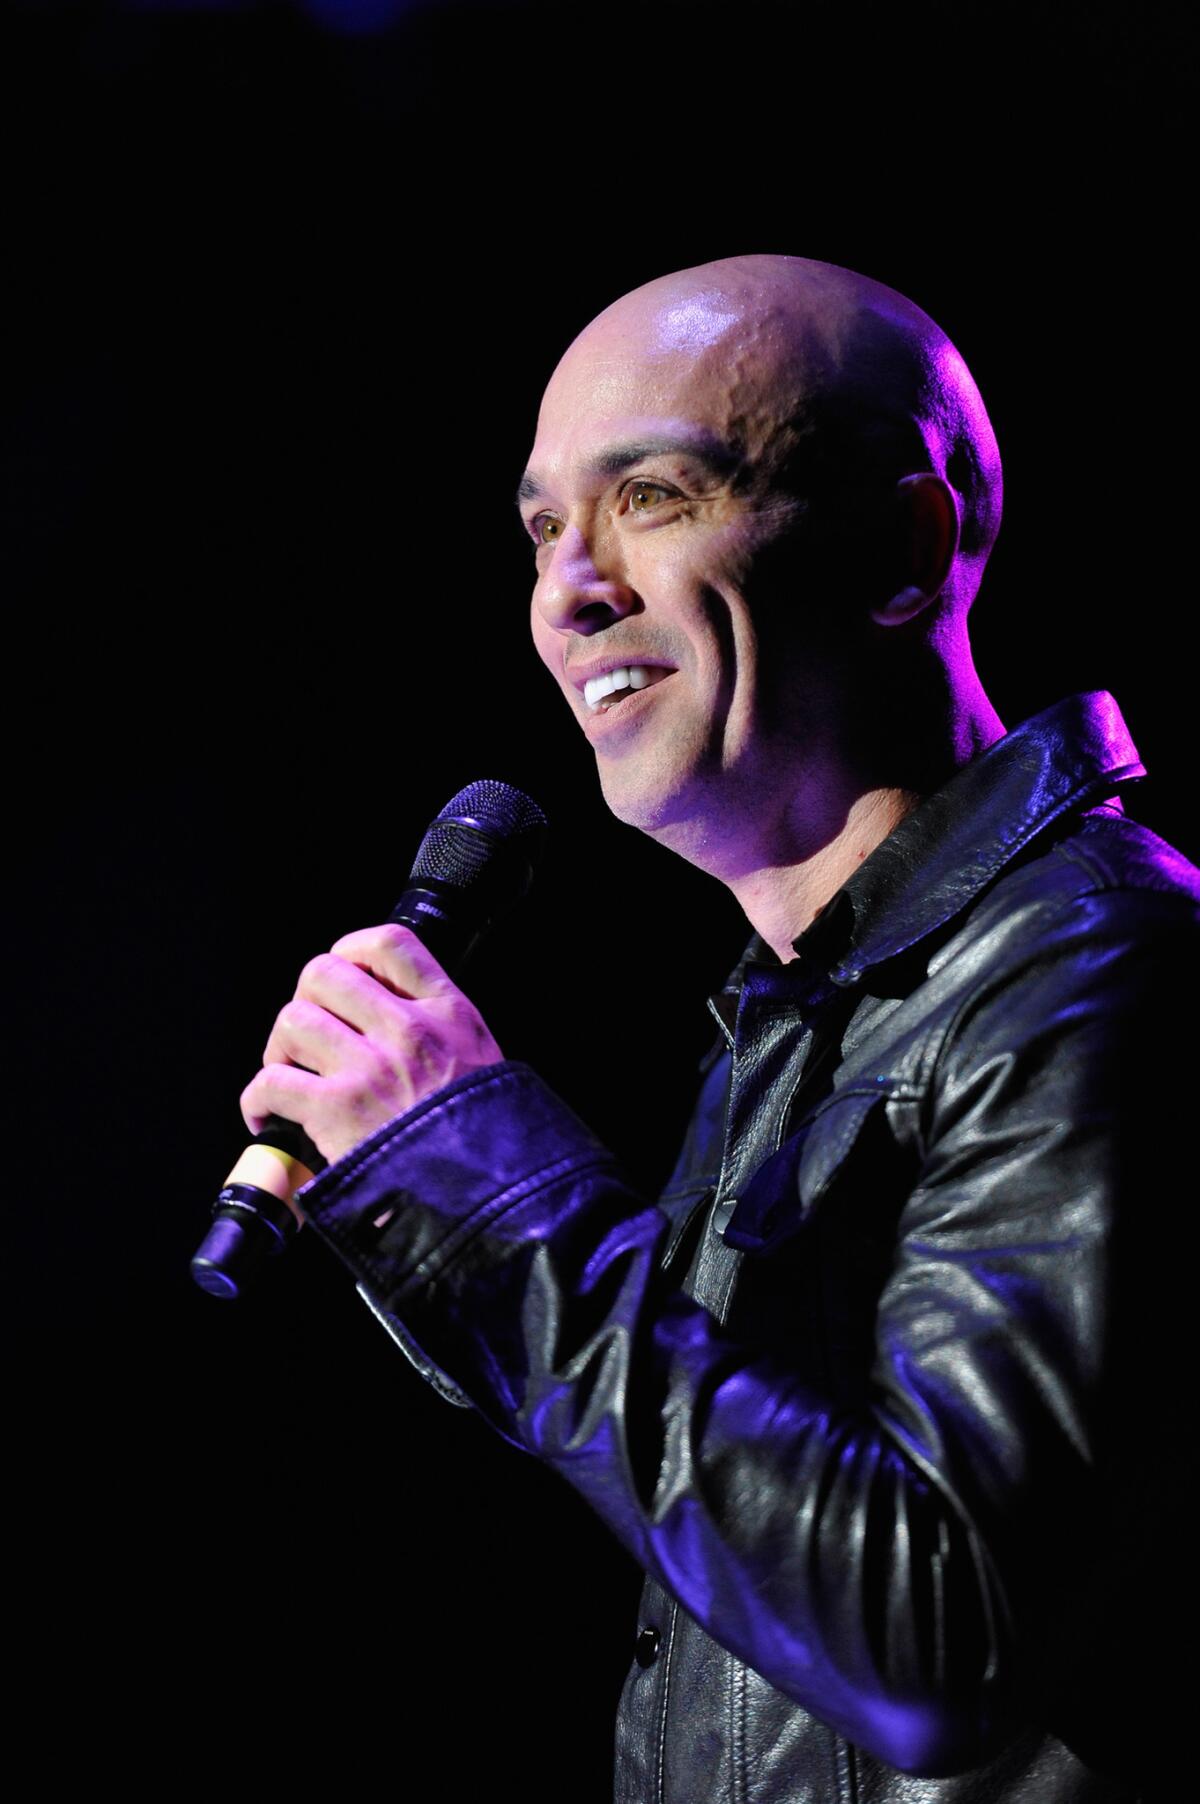 Comedian Jo Koy performs at the Rebuild! Benefit For Typhoon Haiyan Survivors at The Greek Theatre on June 8, 2014 in Berkeley, California. CONTRIBUTED PHOTO / Michael Tullberg / Getty Images